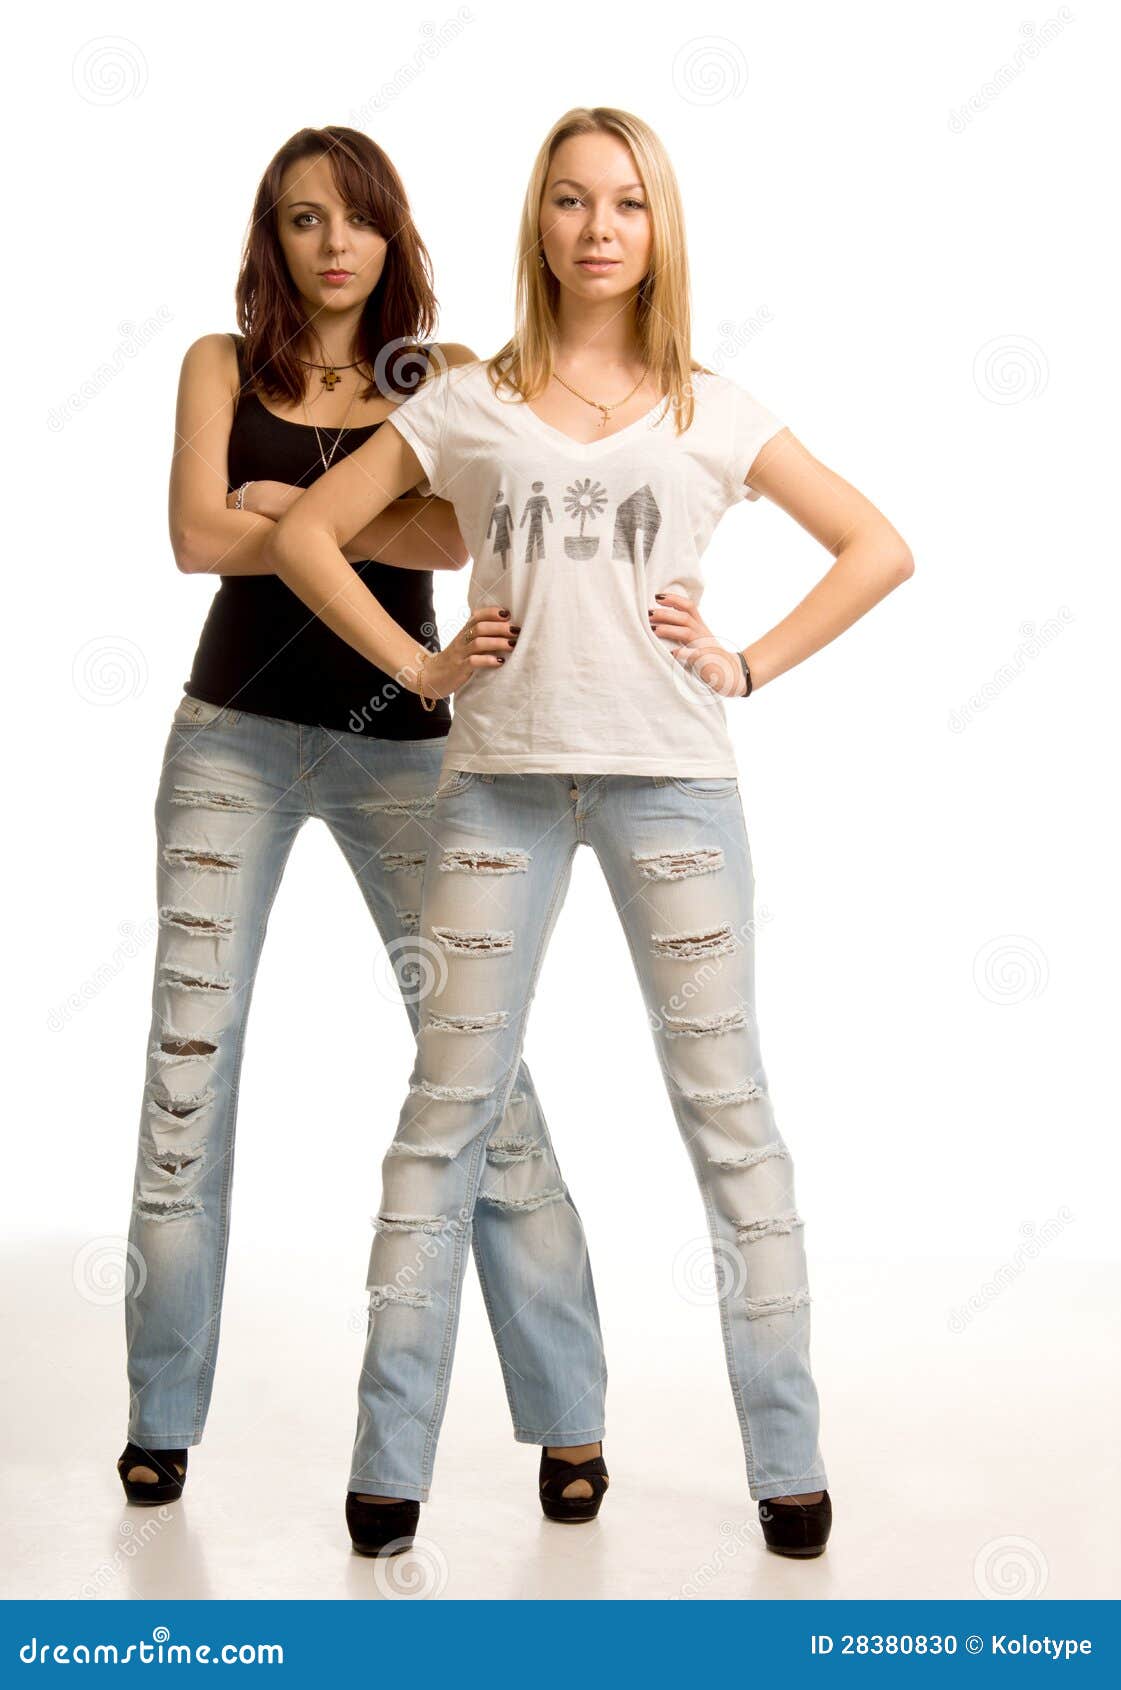 Teens In Tight Jeans Pics